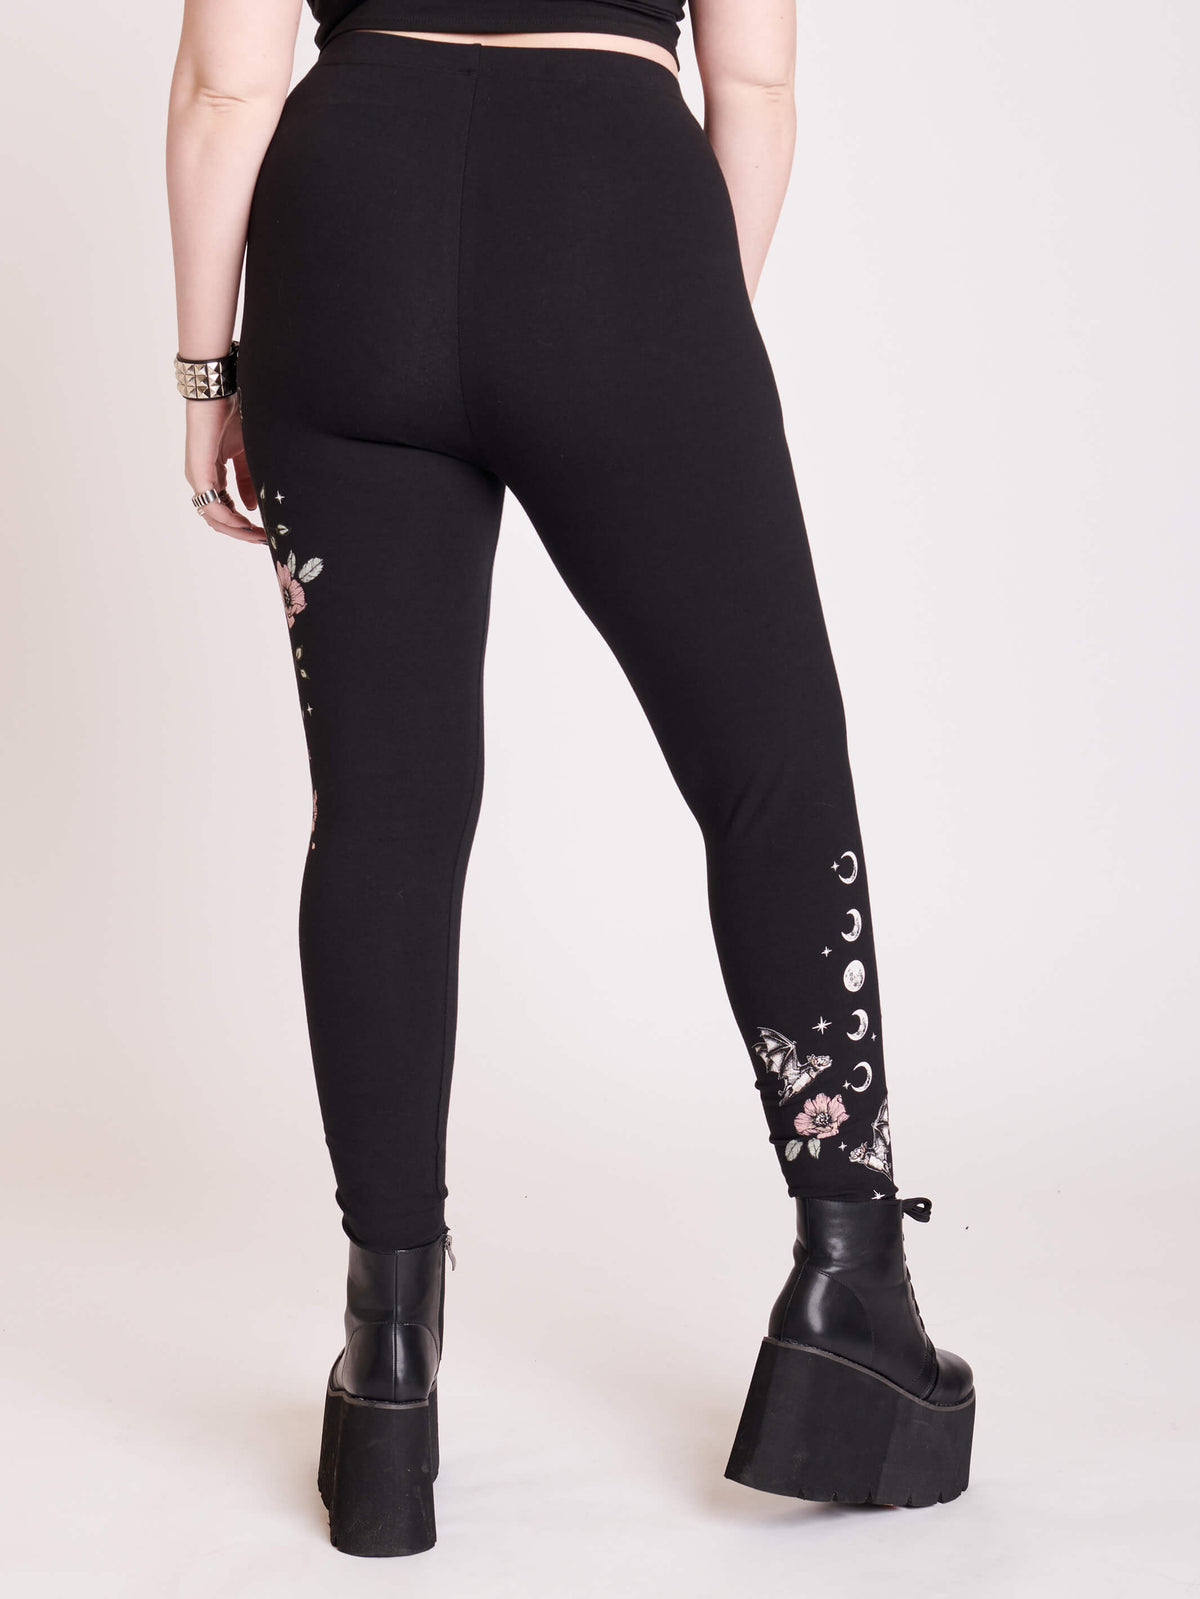 Black legging with snake and flower graphic